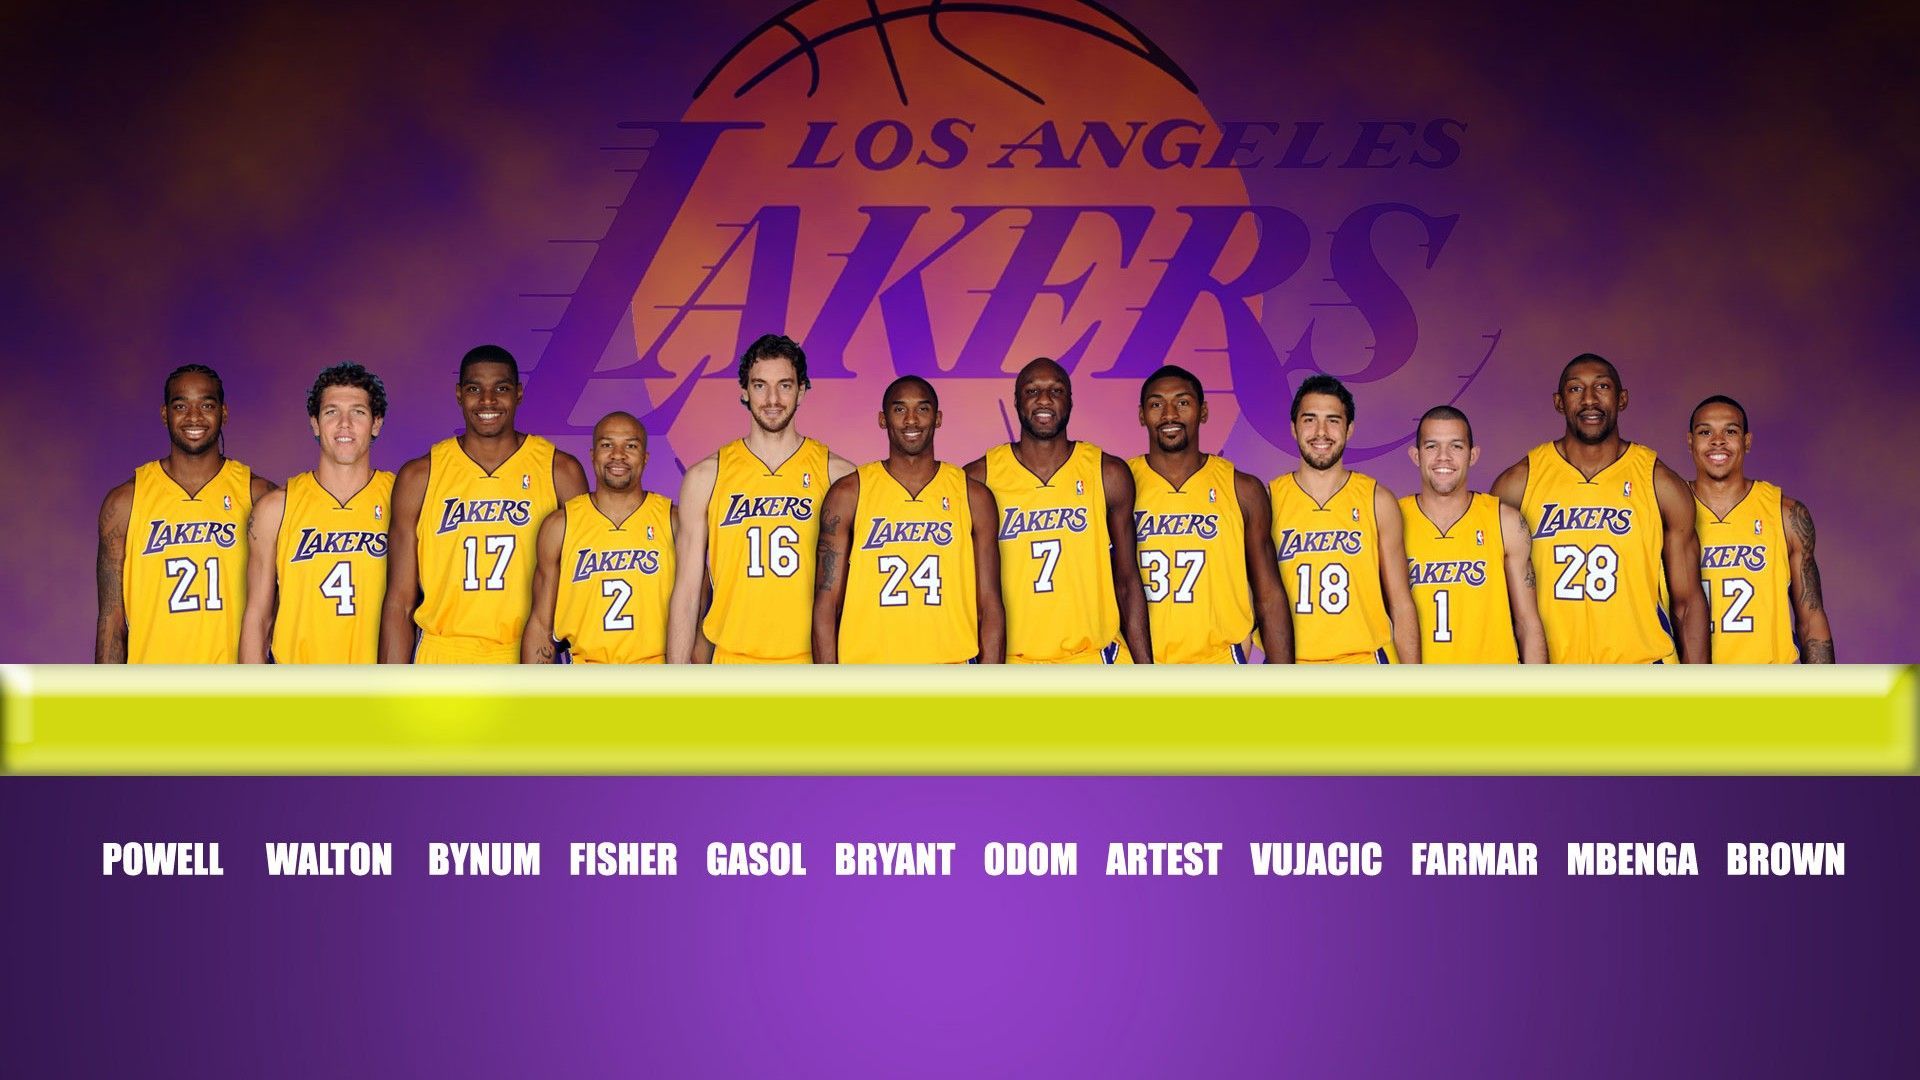 Lakers Jersey Wallpapers - Wallpaper Cave